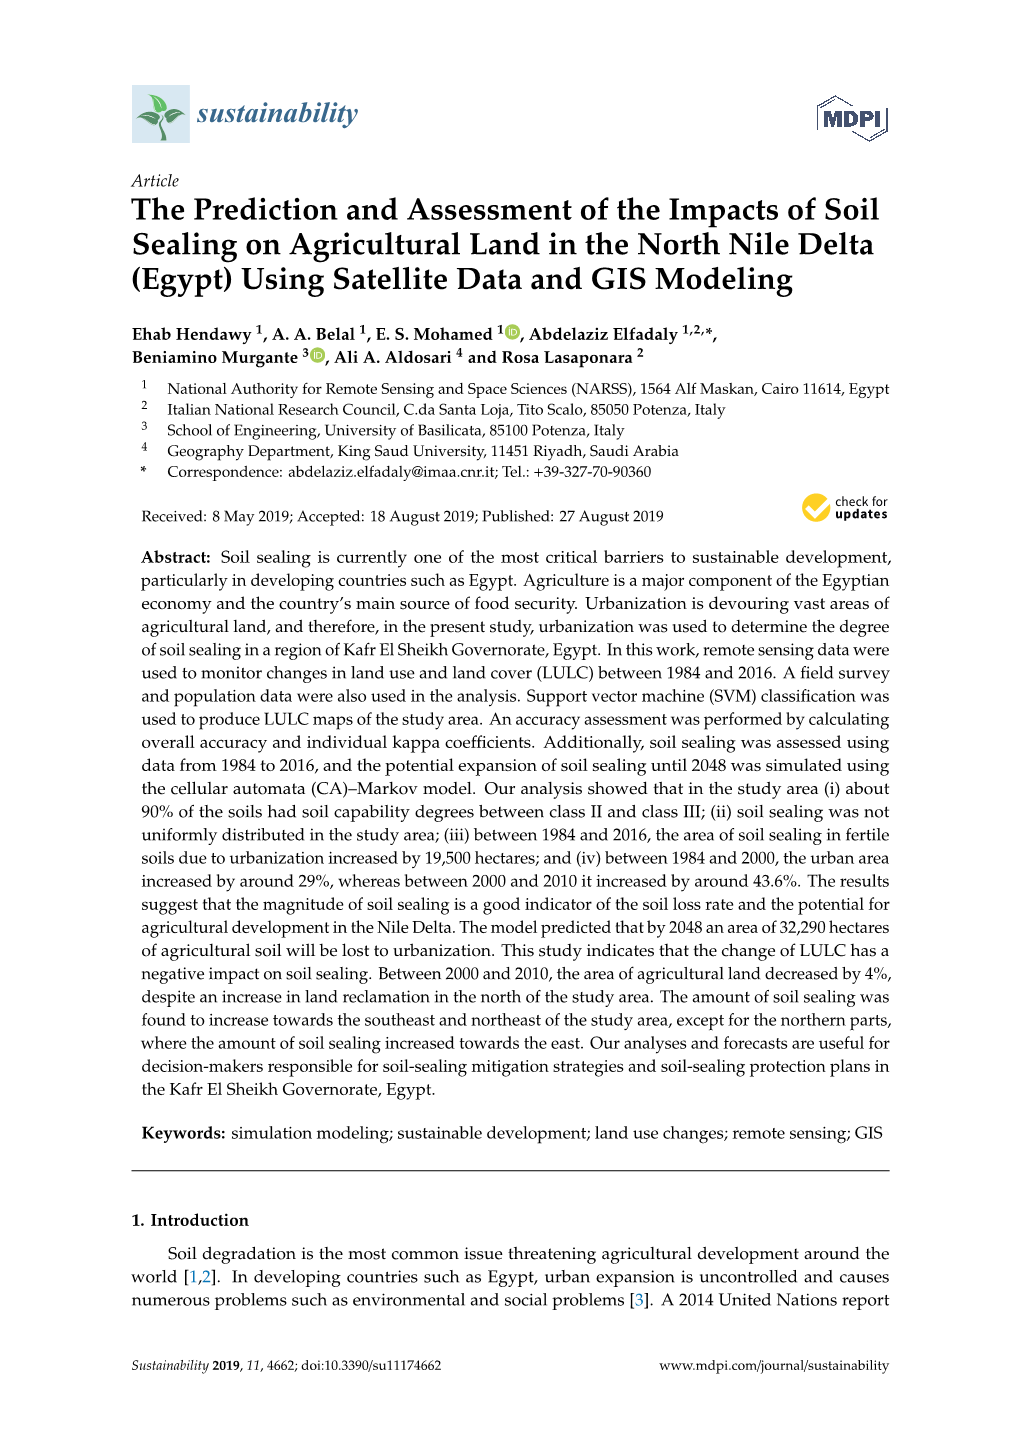 The Prediction and Assessment of the Impacts of Soil Sealing on Agricultural Land in the North Nile Delta (Egypt) Using Satellite Data and GIS Modeling